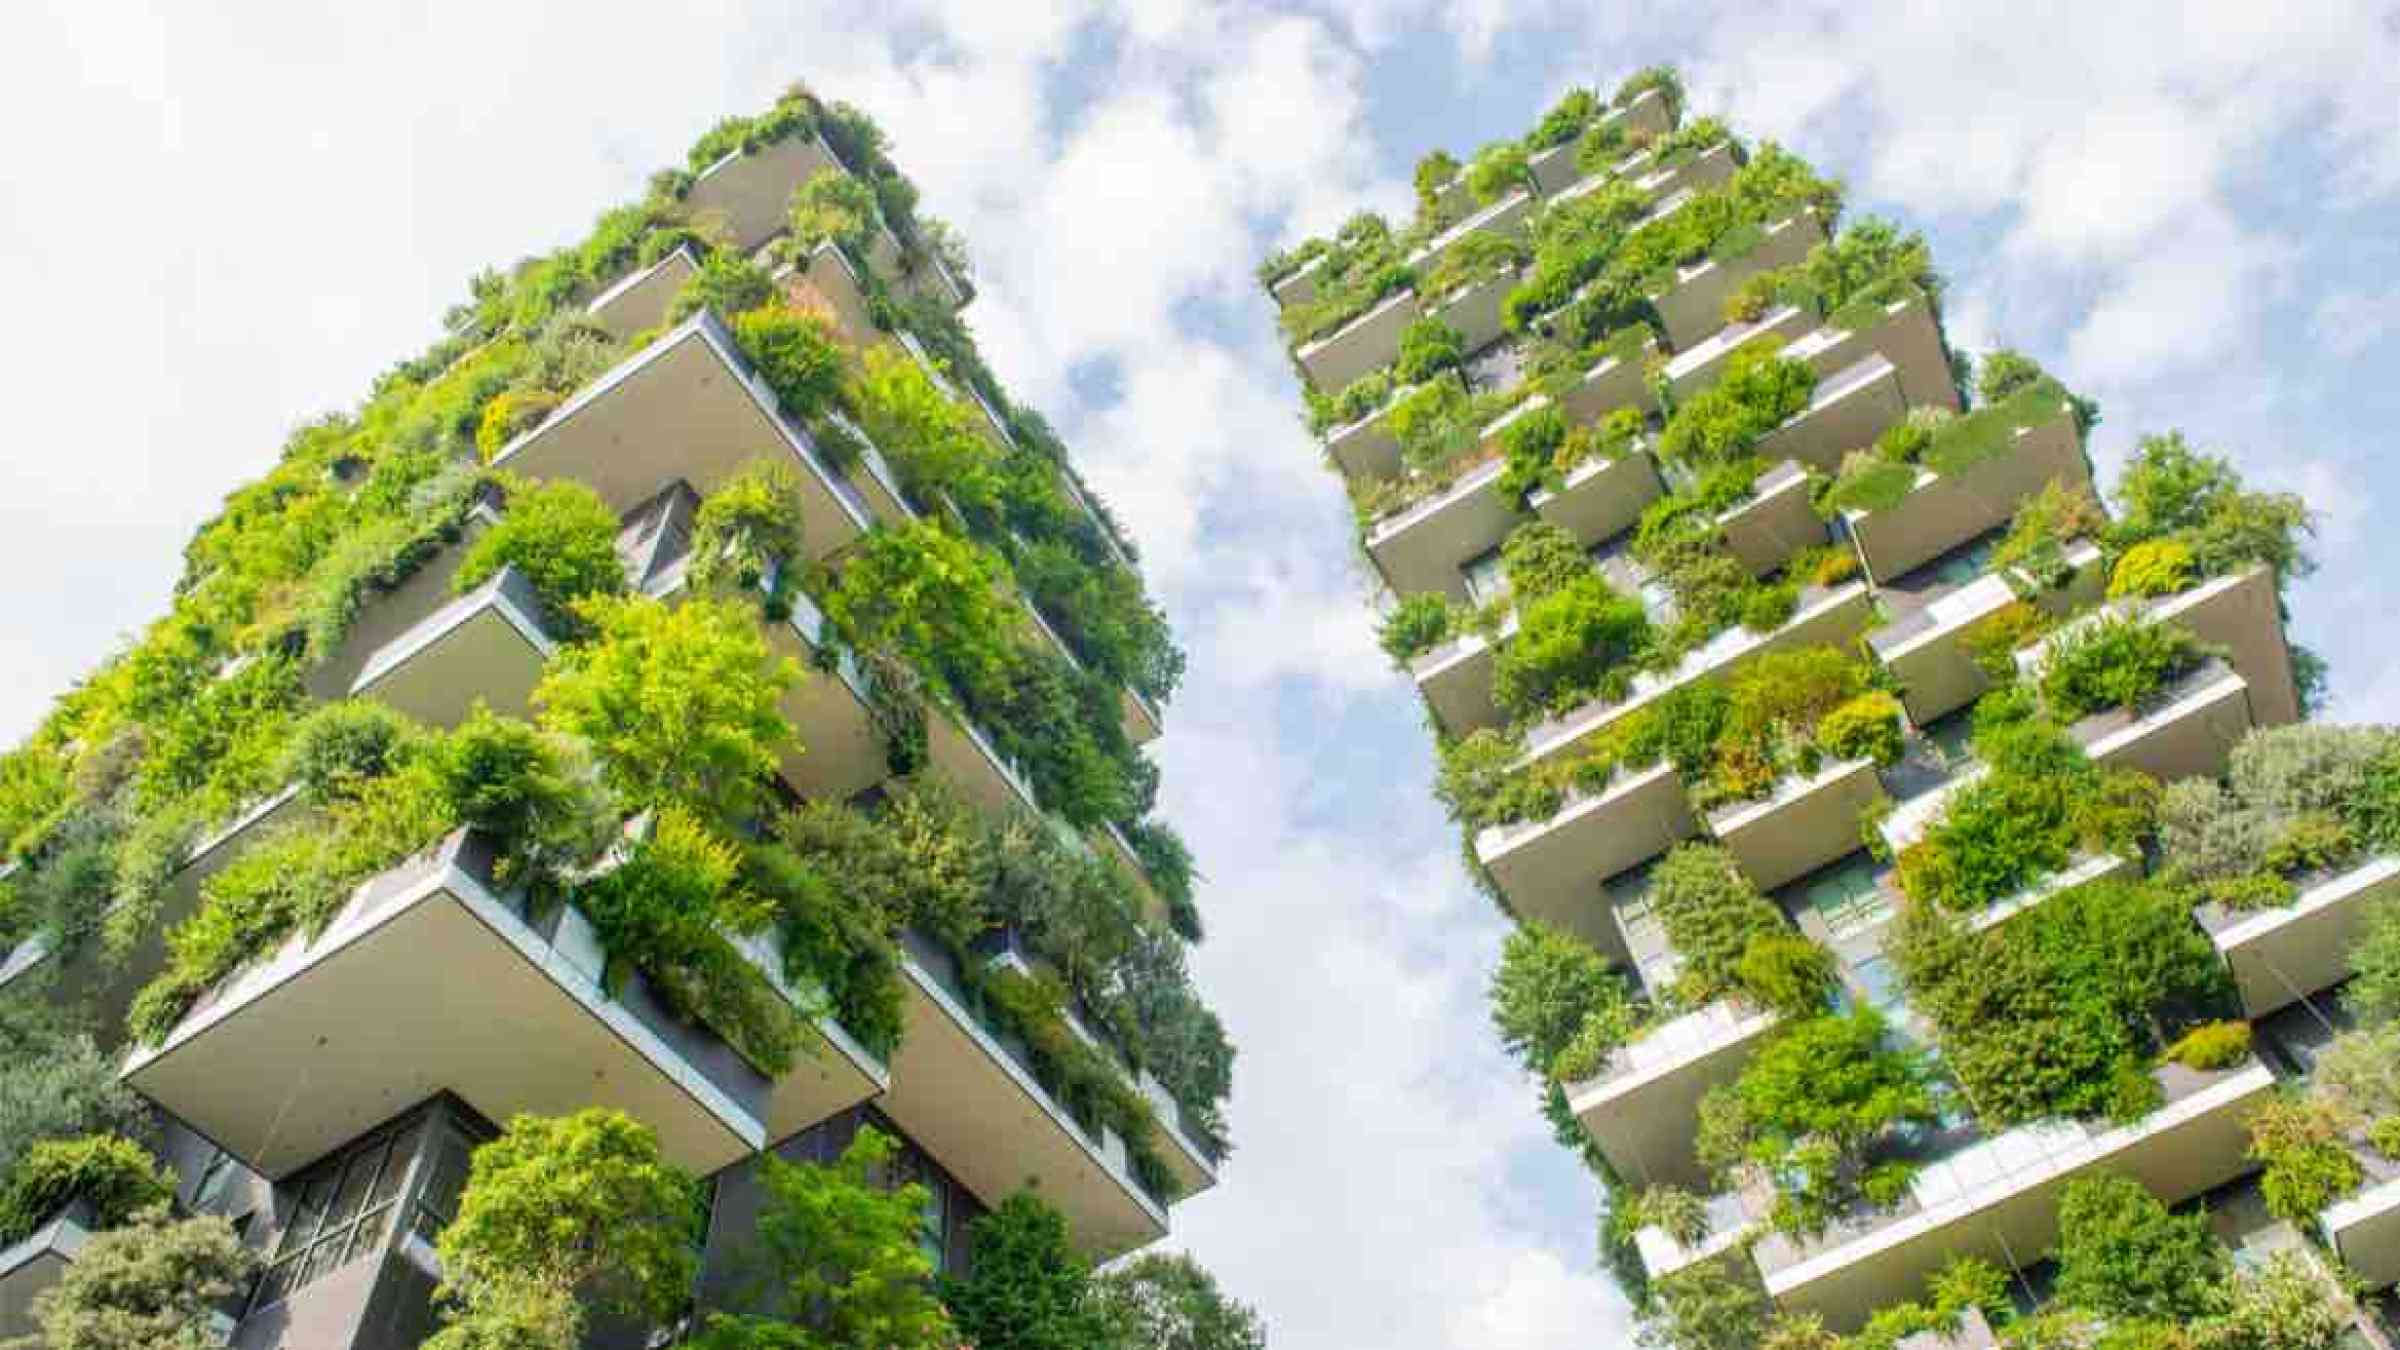 Highrise buildings with greened terraces, Milan